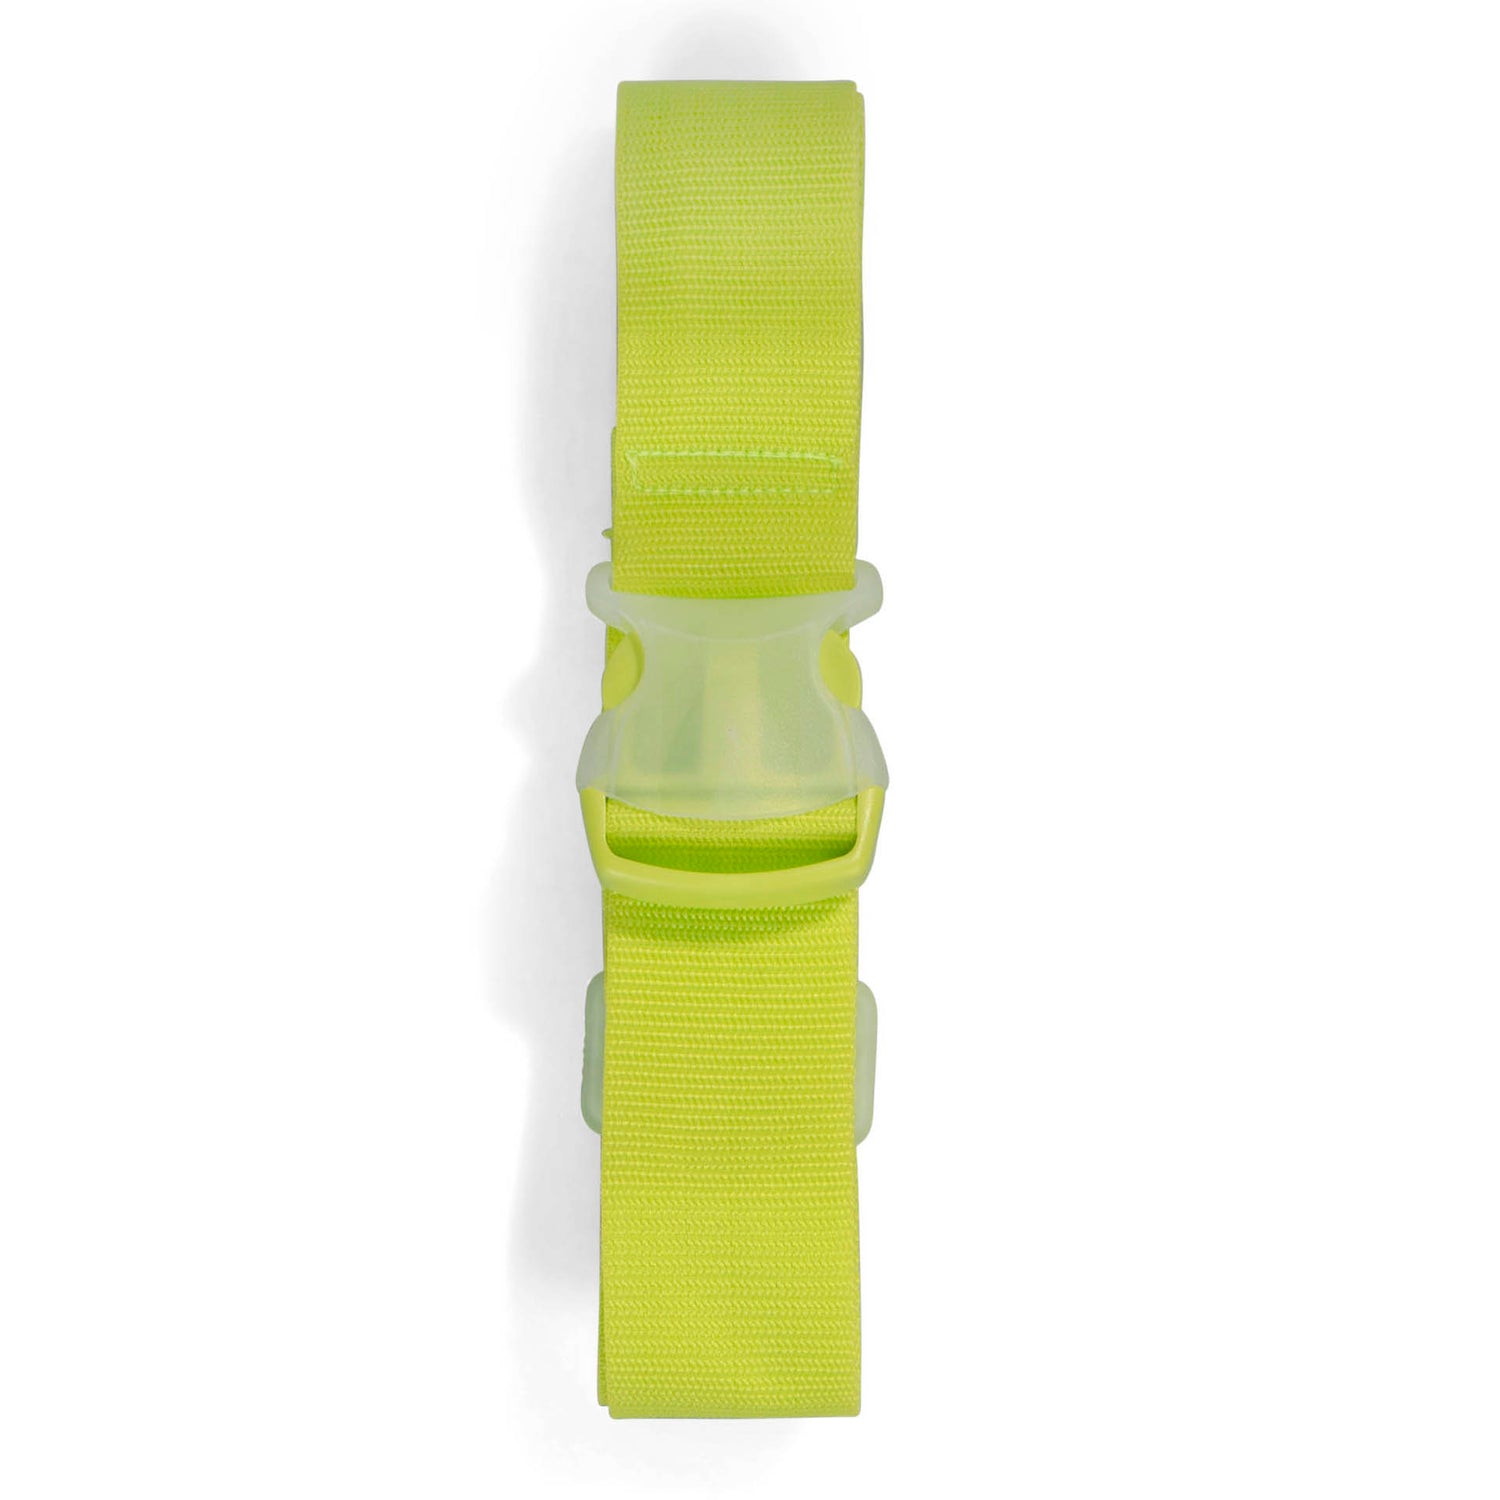 Front view of a neon luggage strap showing its resistant textured polyester and transparent plastic buckle.